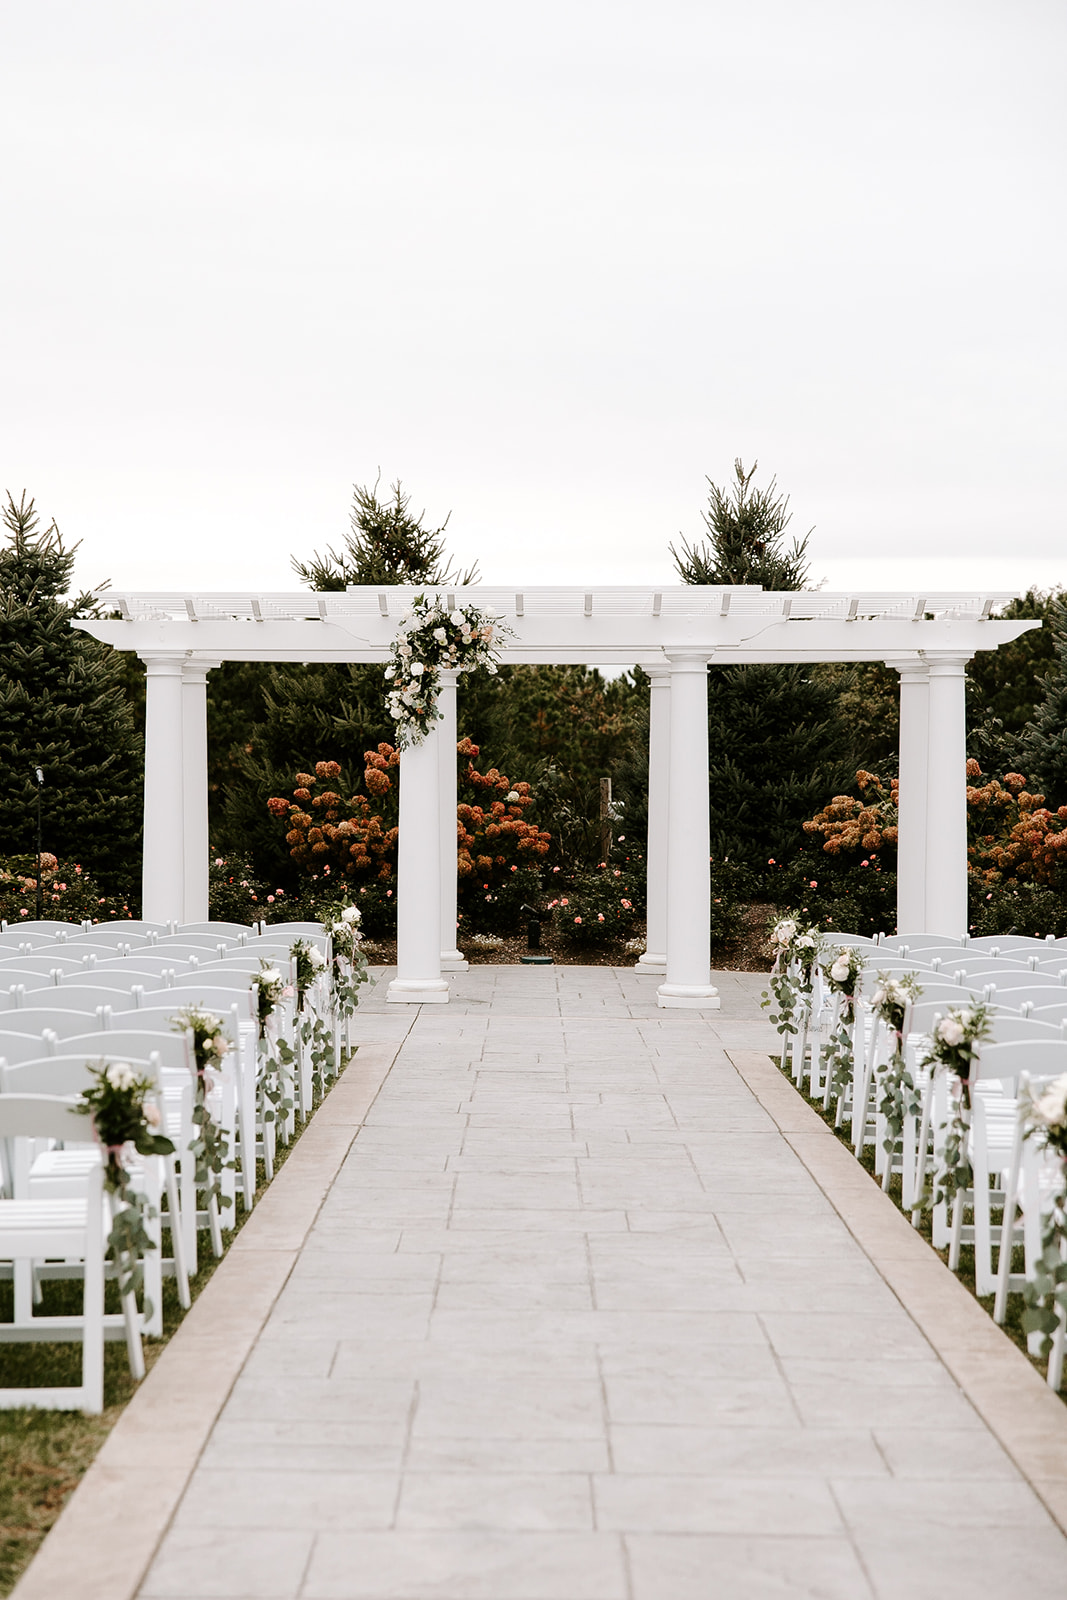 Dreamy New England wedding day sits ready for the stunning New England